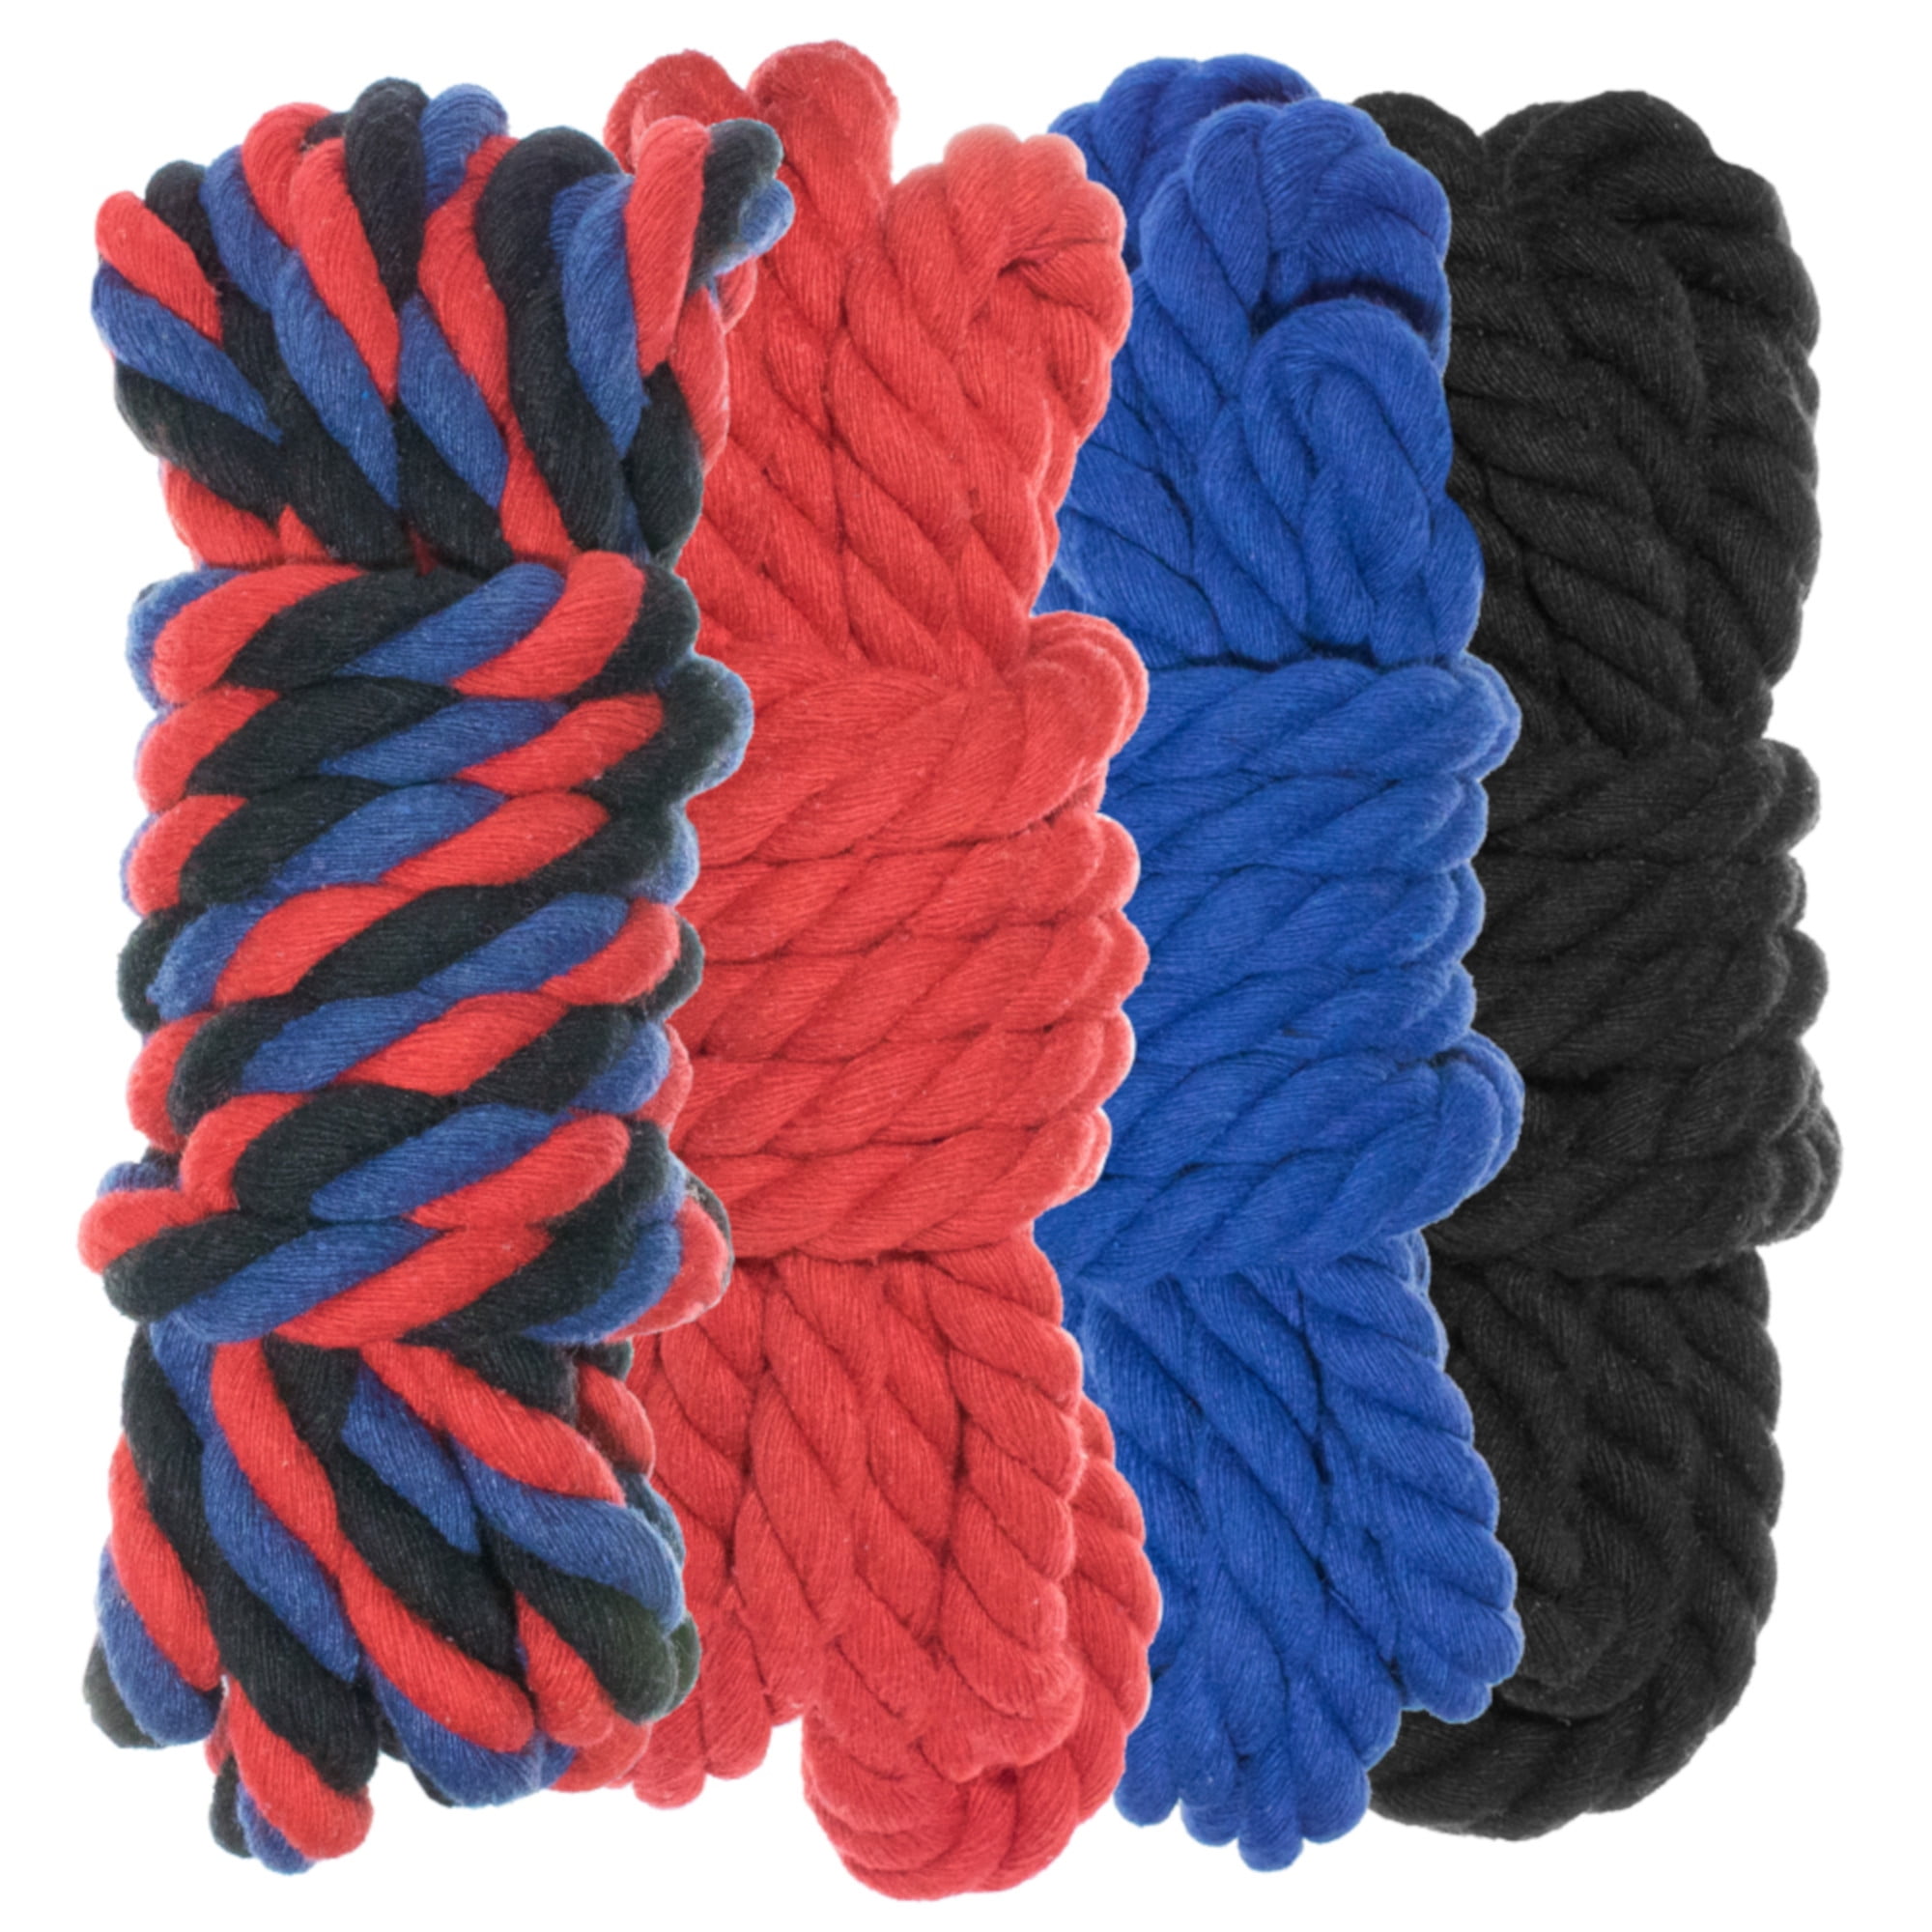 Natural Twisted Cotton Rope 1/4 Inch - Biodegradable Cord with No Bleach or  Dyes - Low Stretch Line in High Strength Capacity - Arts, Crafts